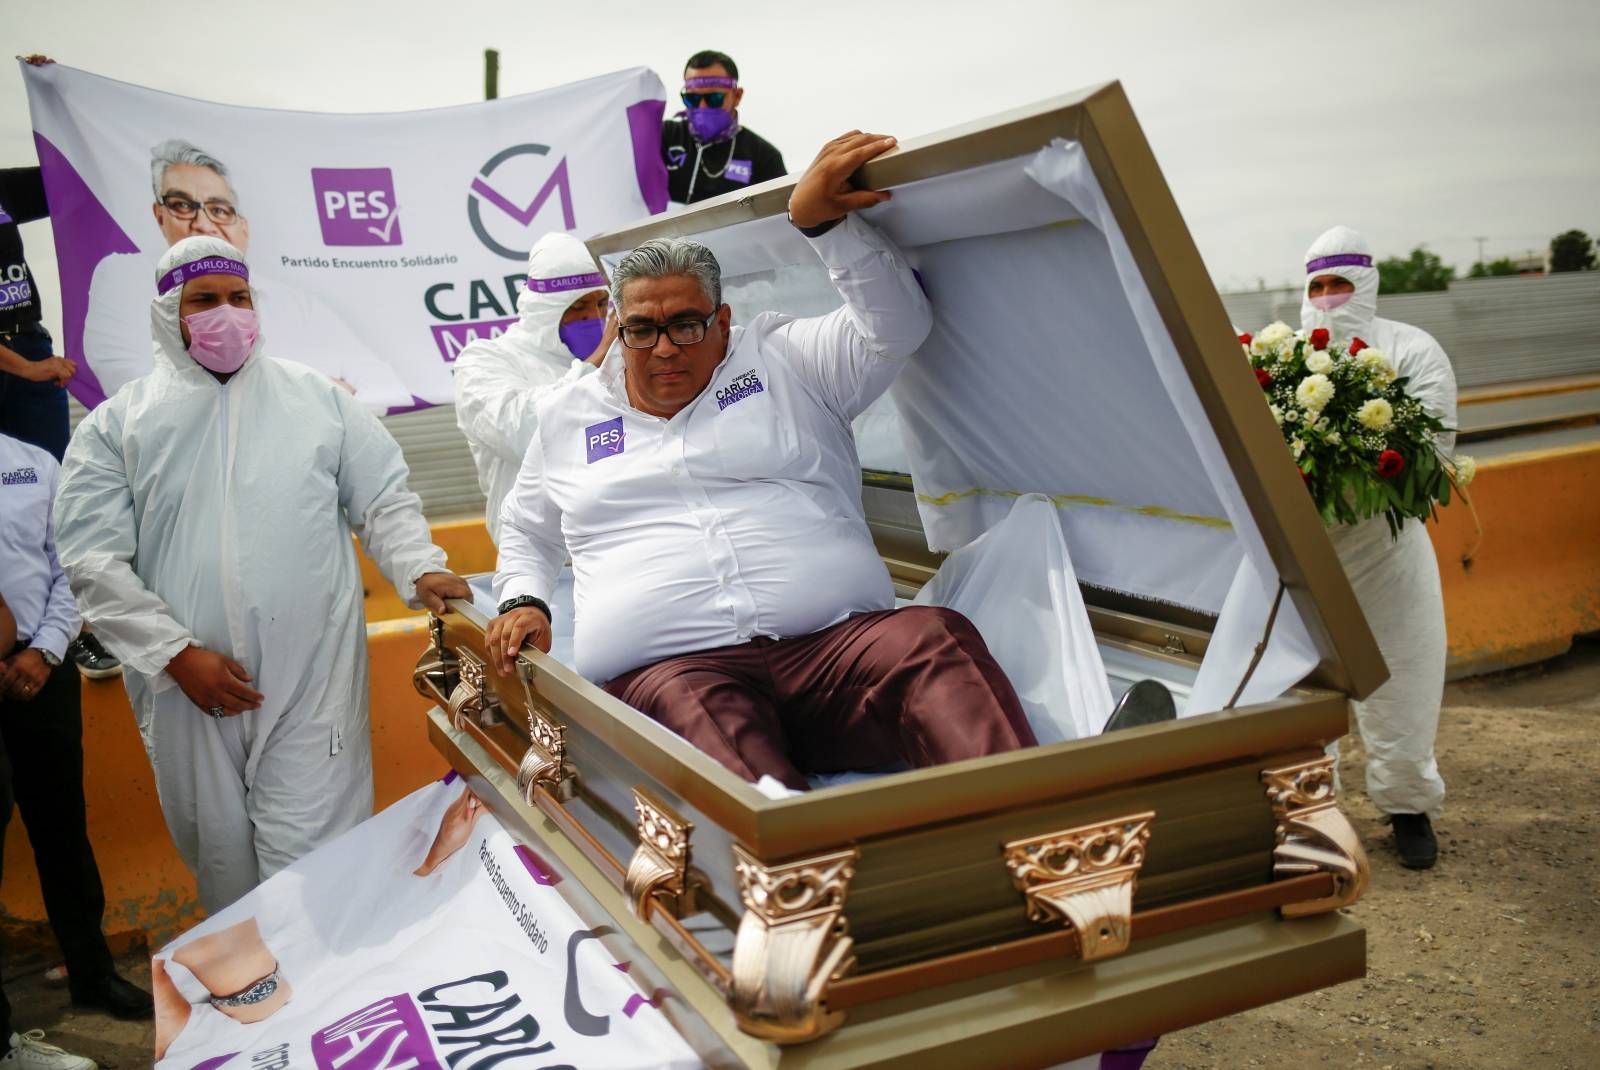 Carlos Mayorga, Mexican candidate for federal representative, emerges from a coffin as part of his campaign slogan "If I don't deliver, let them bury me alive" near the Zaragoza-Ysleta international border bridge, in Ciudad Juarez